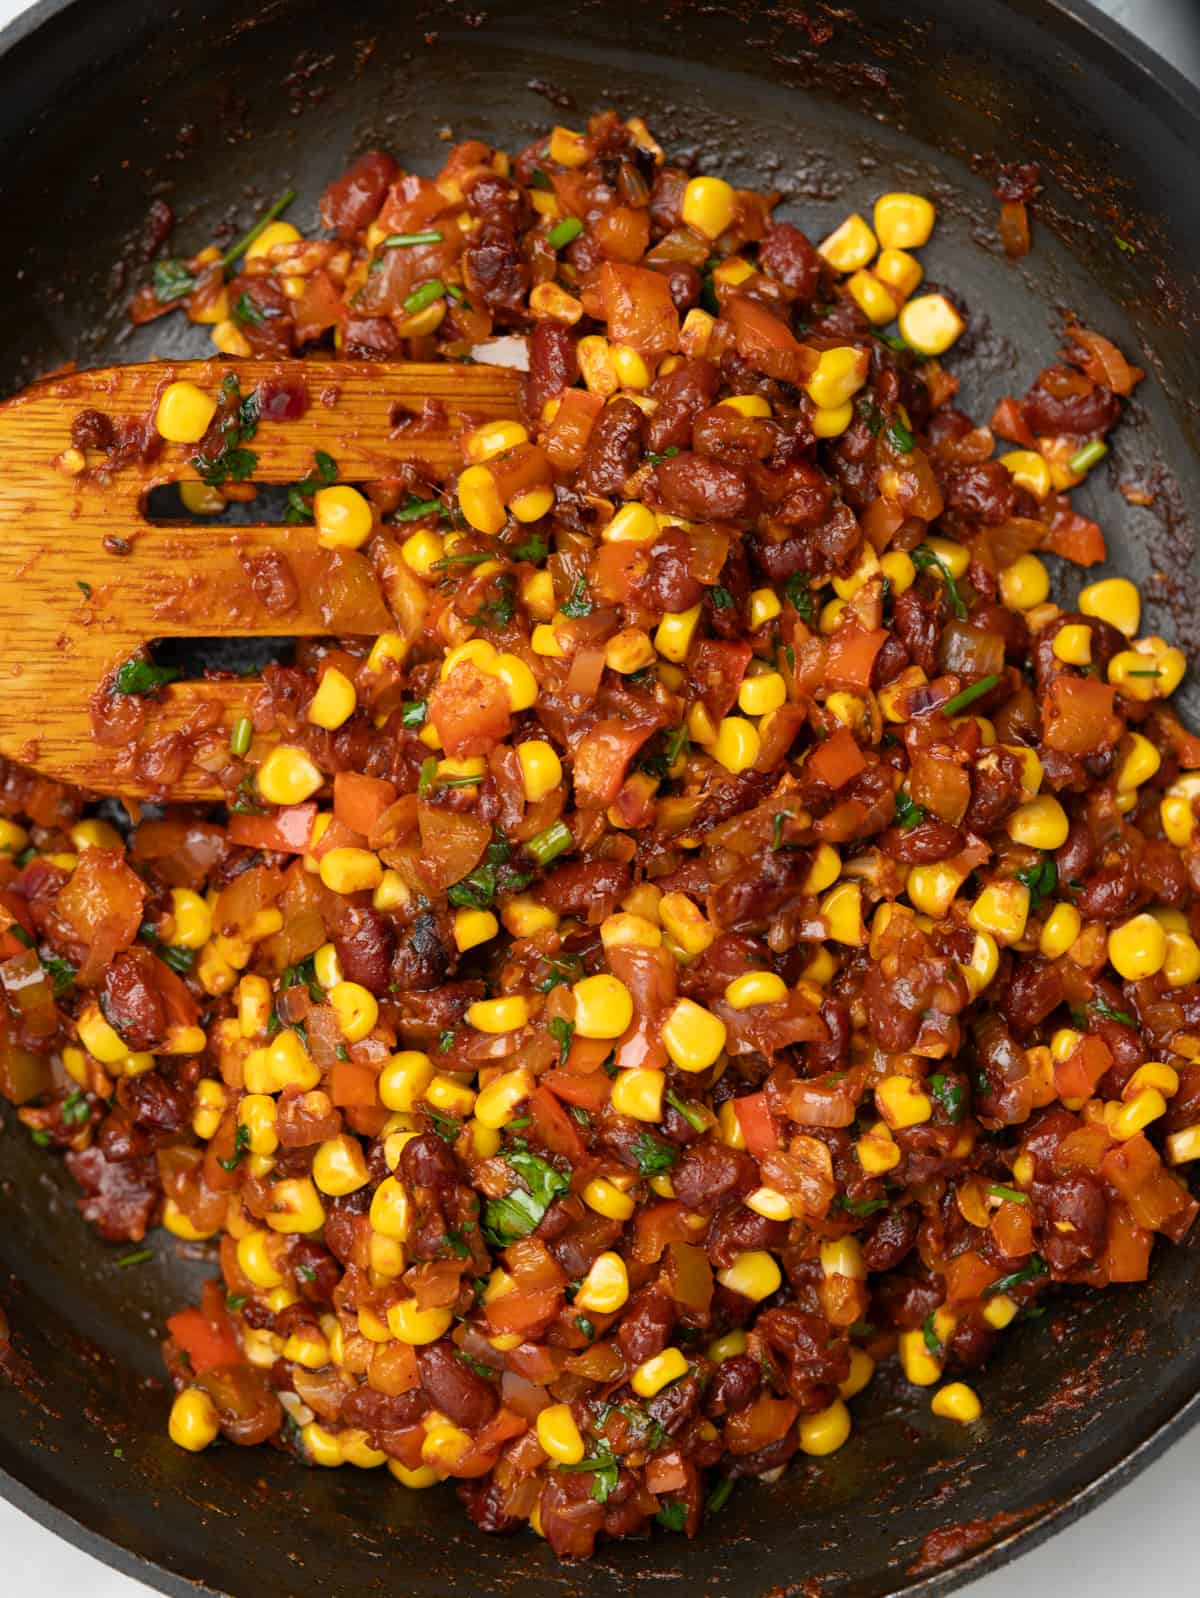 Bean, corn kernel, onion and peppers cooked with taco seasoning for quesadilla filling. 